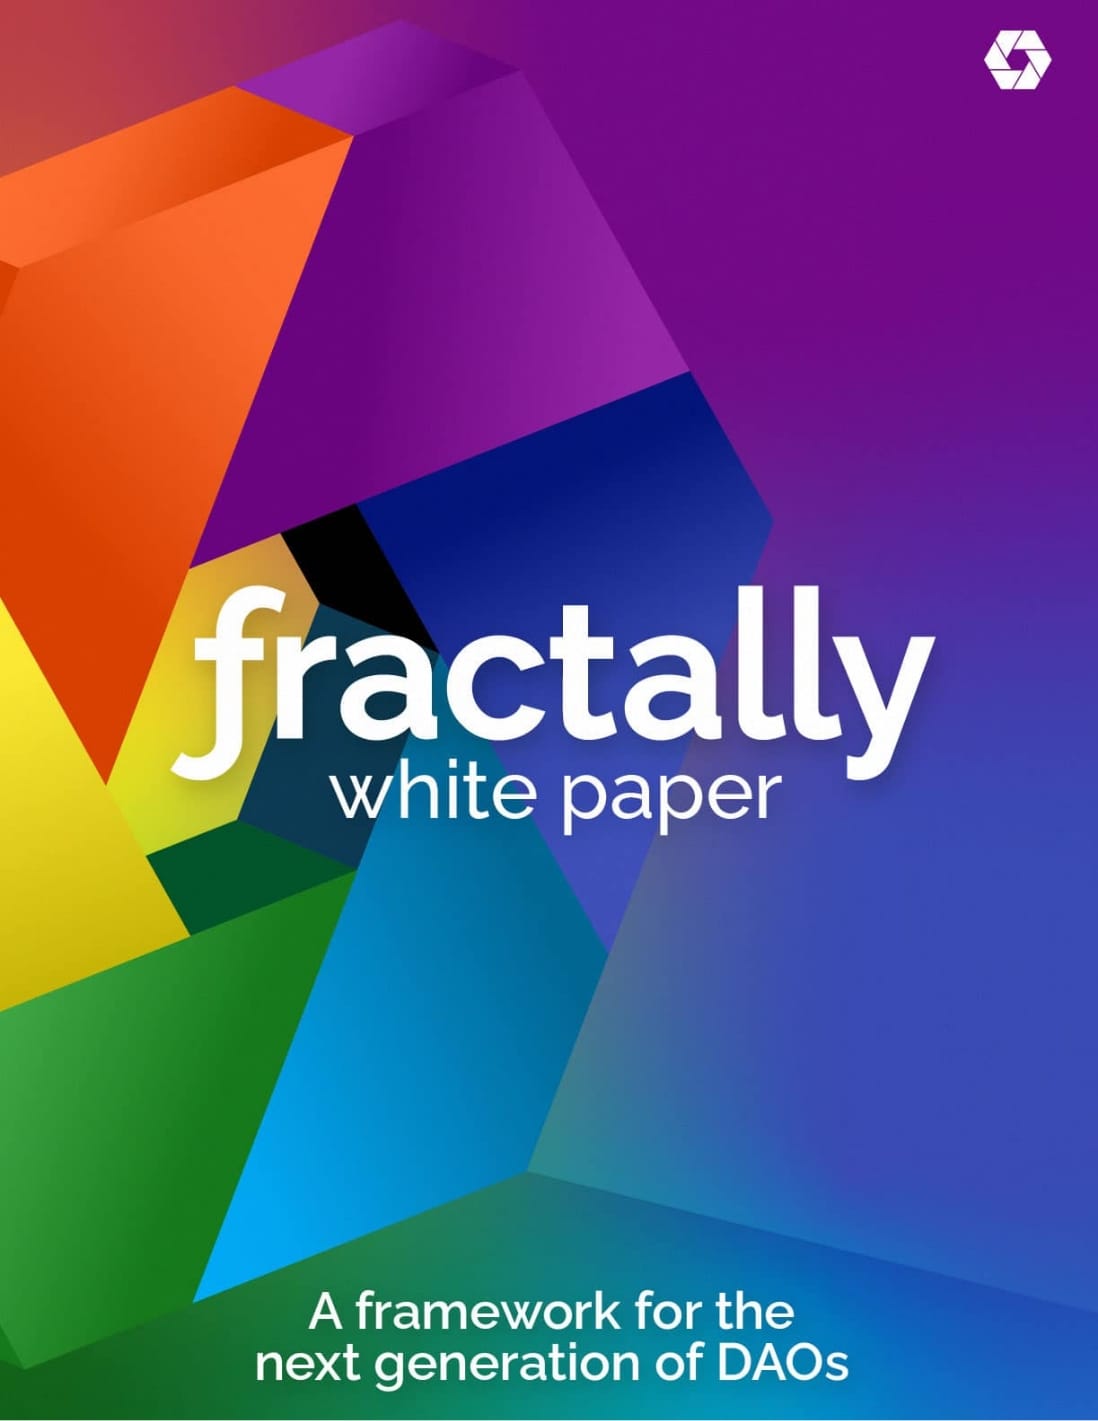 Download the Fractally white paper